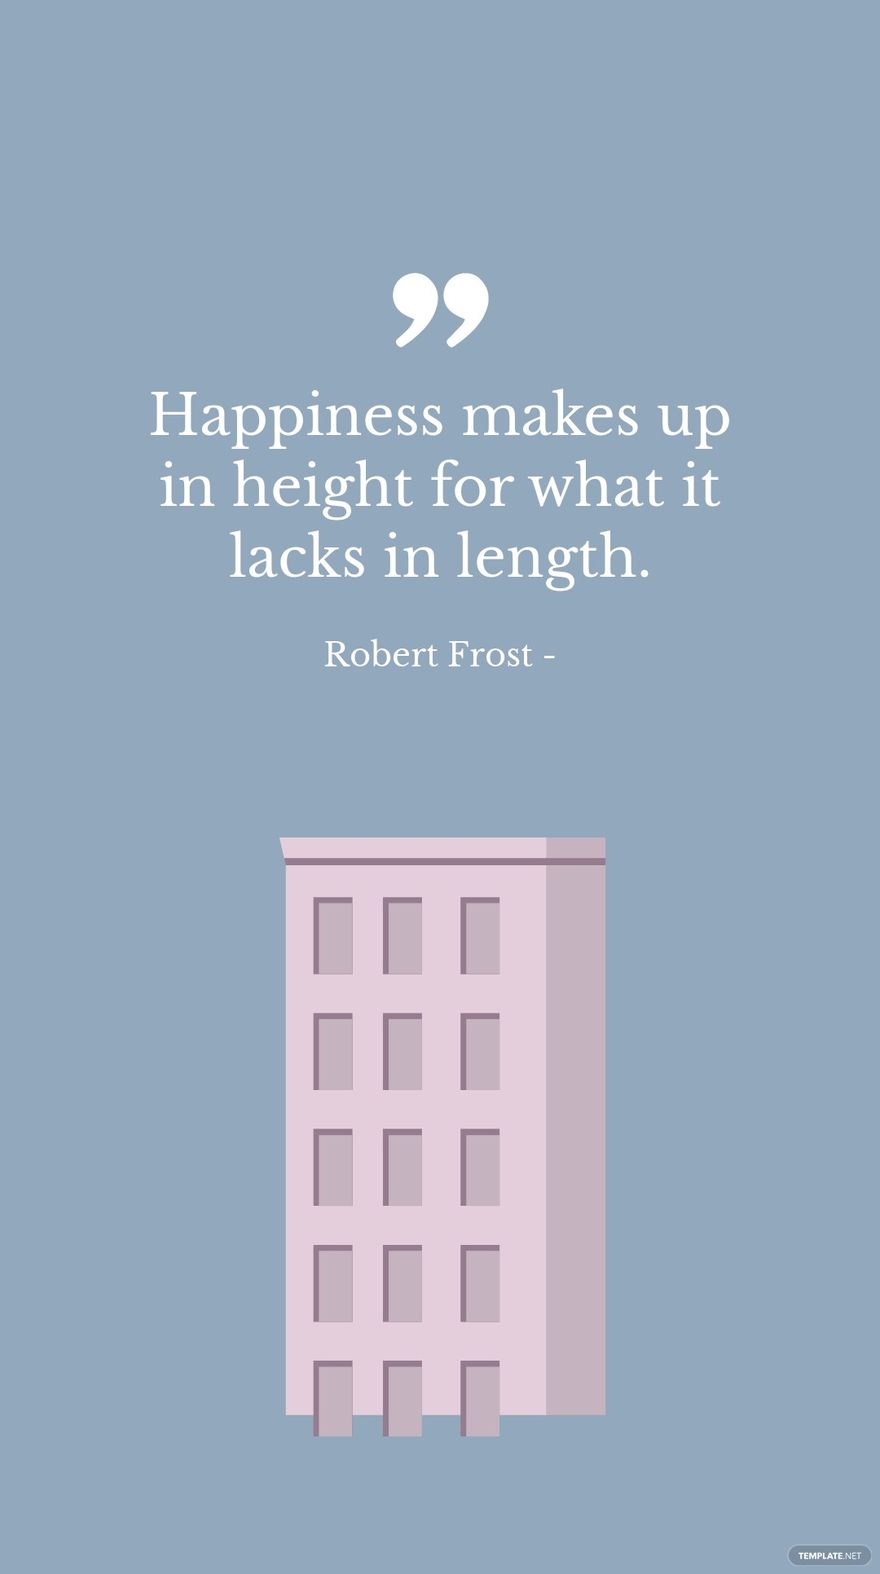 Robert Frost - Happiness makes up in height for what it lacks in length.